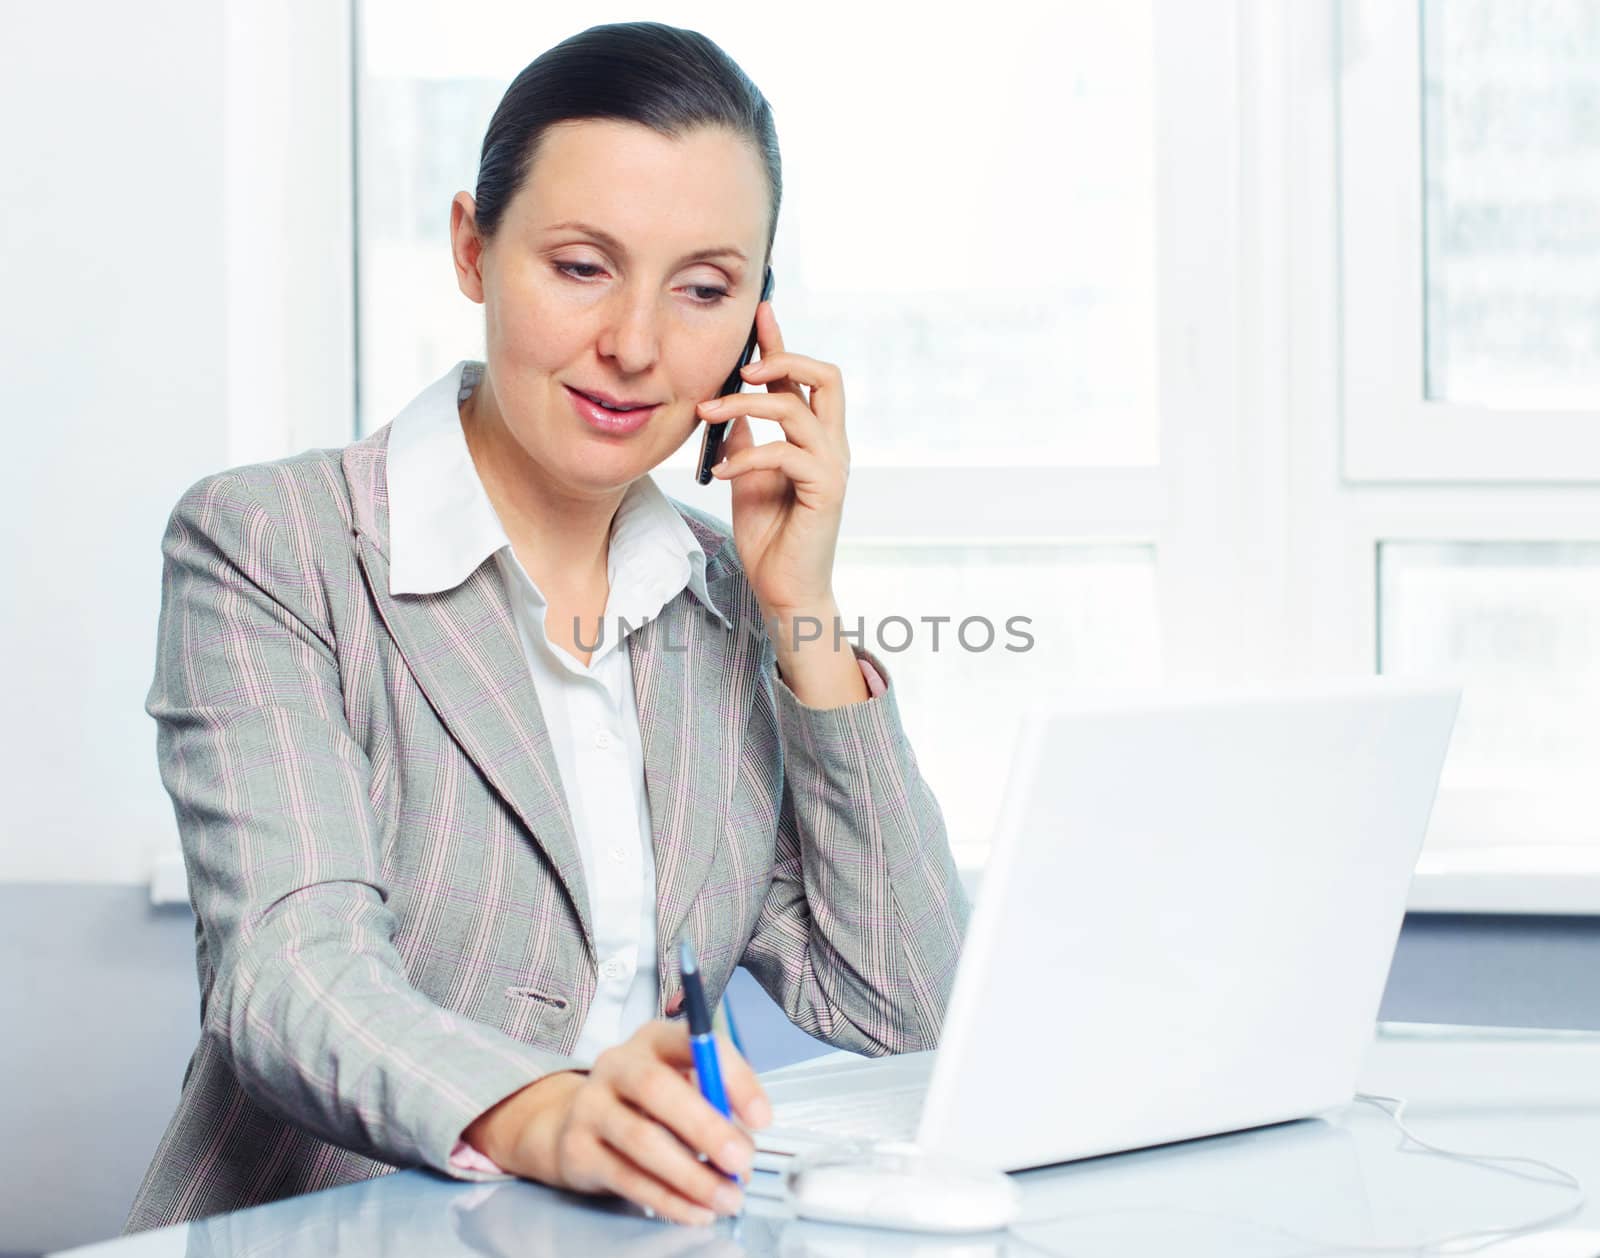 Attractive smiling young business woman using laptop by maxoliki